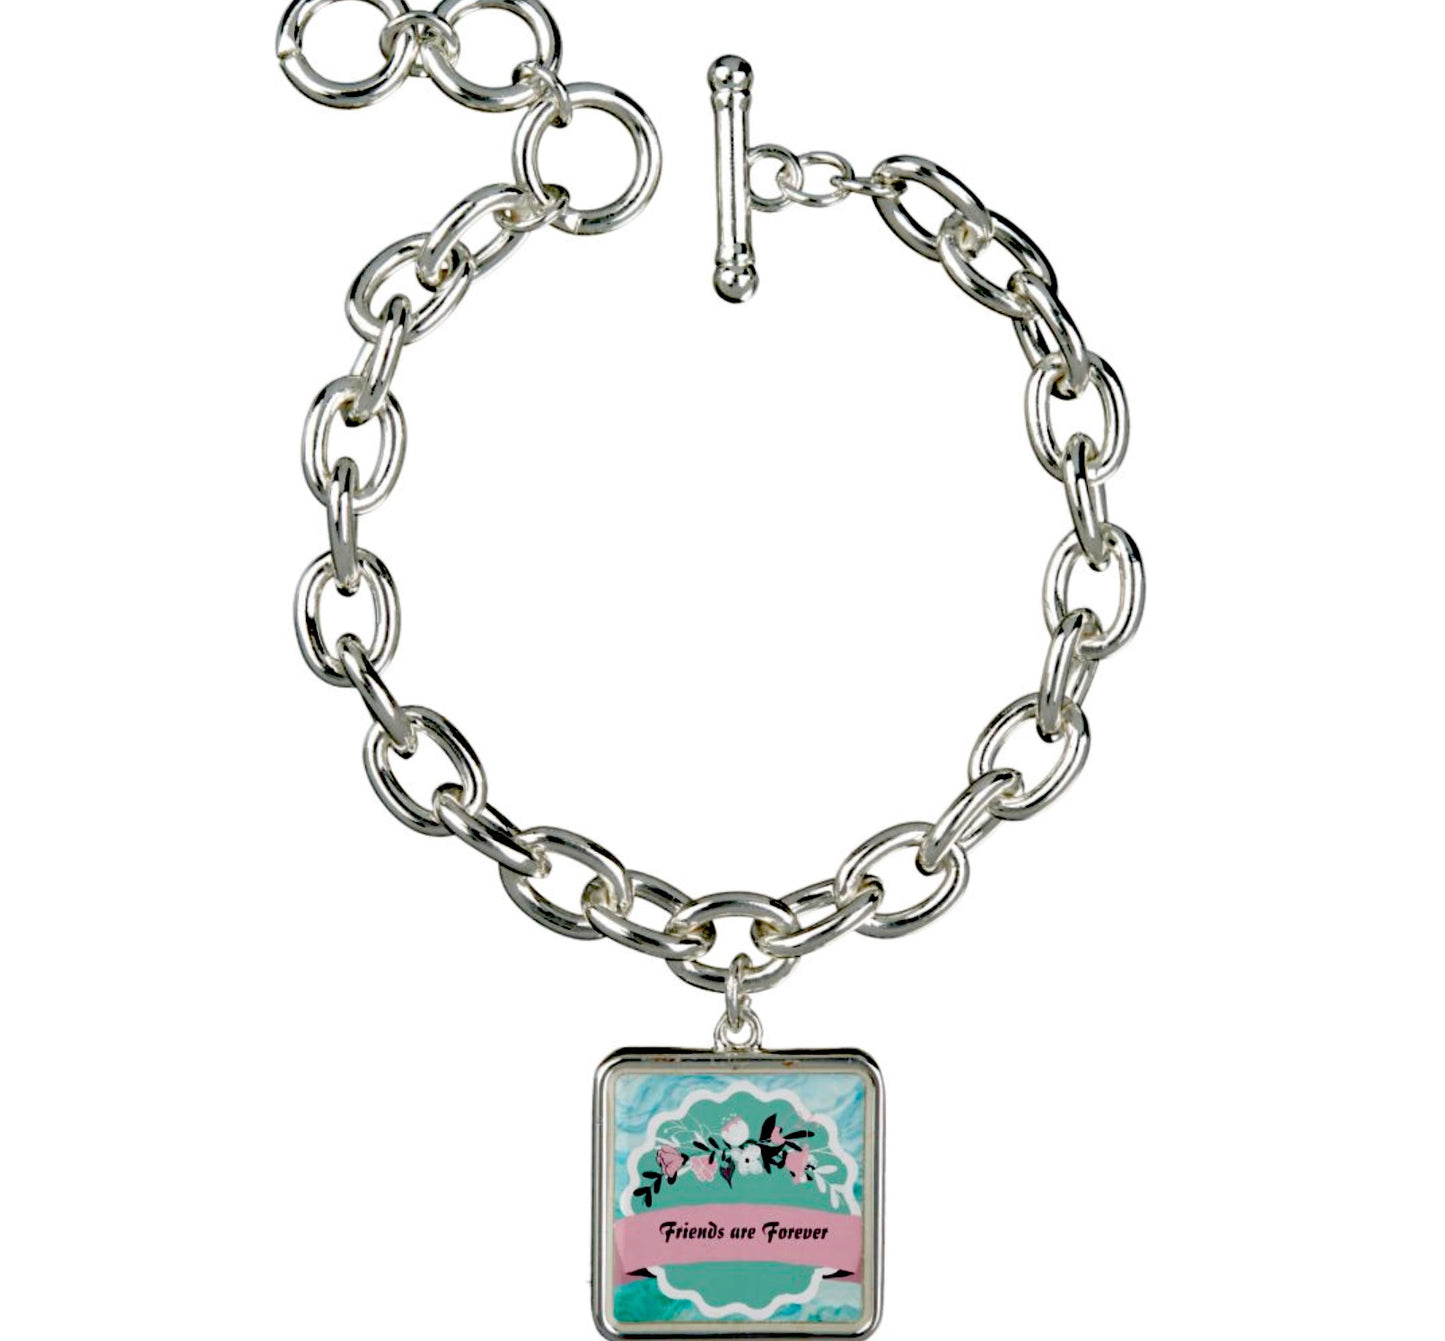 Charm-Bracelet-friends-are-forever-square-product